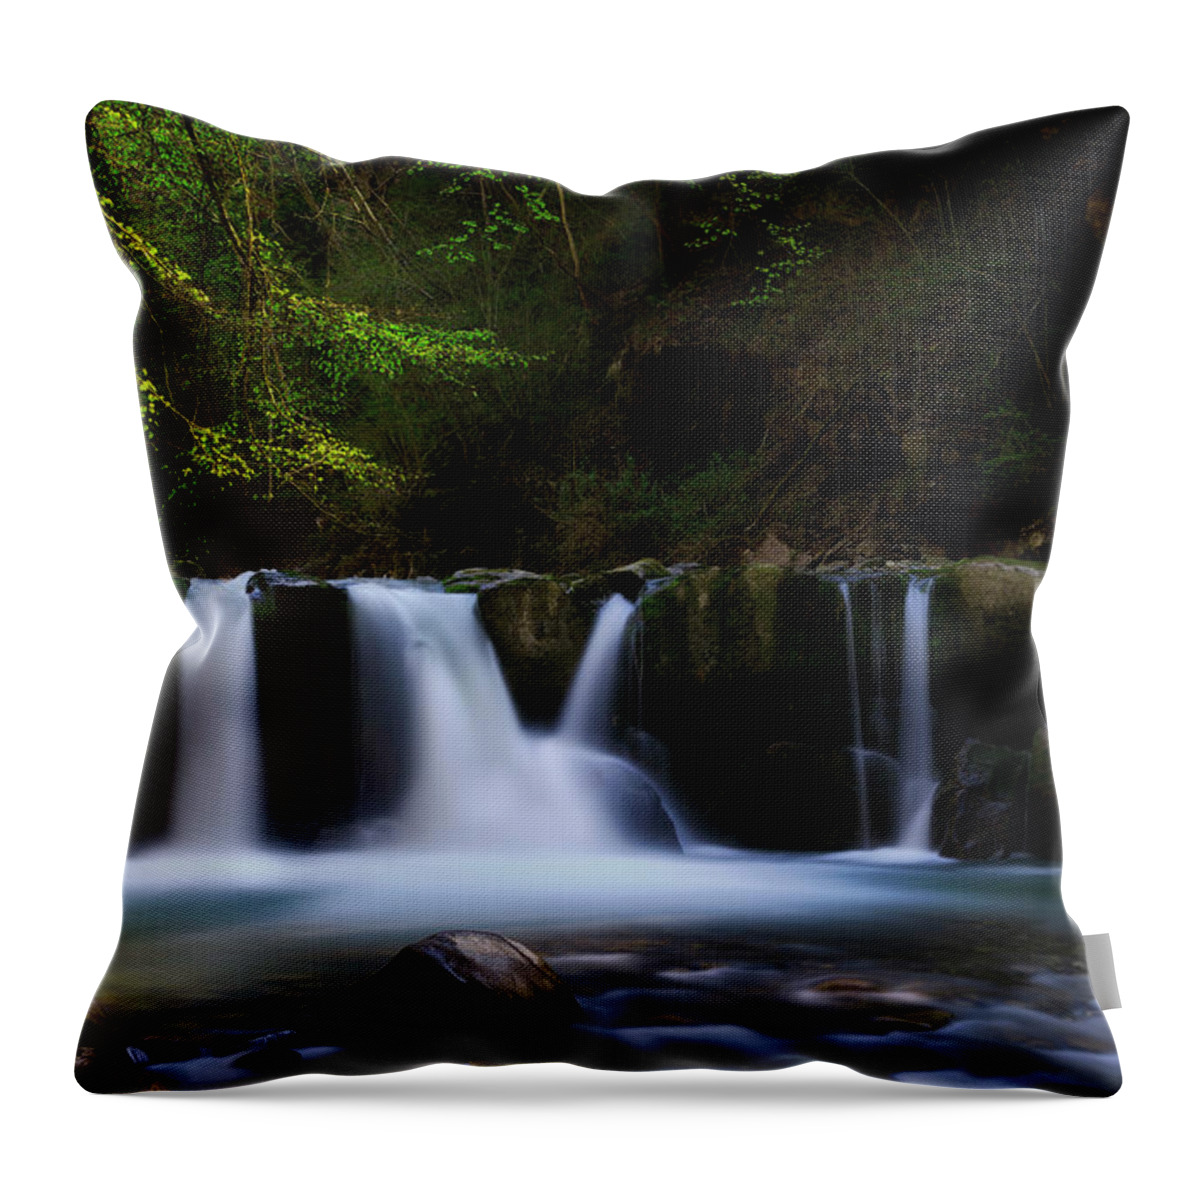 Waterfall Throw Pillow featuring the photograph Renewal II by Dominique Dubied